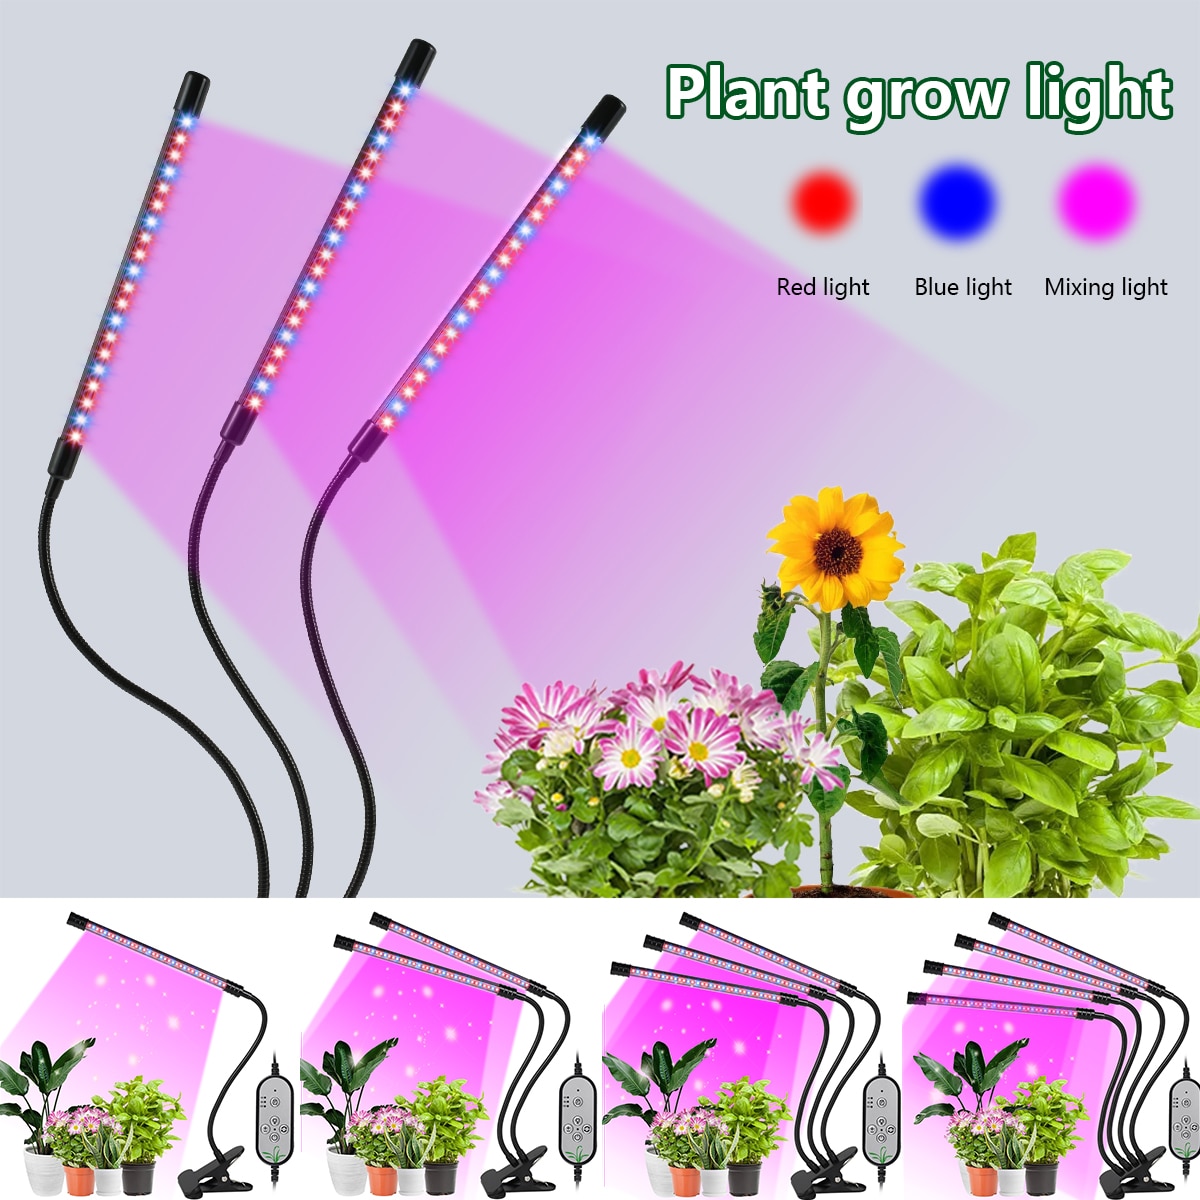 USB LED Grow Light Full Spectrum Phytolamps Red & Blue Plant Growing Lamp With Clip 5 Level Dimmable Waterproof Growing Lamp